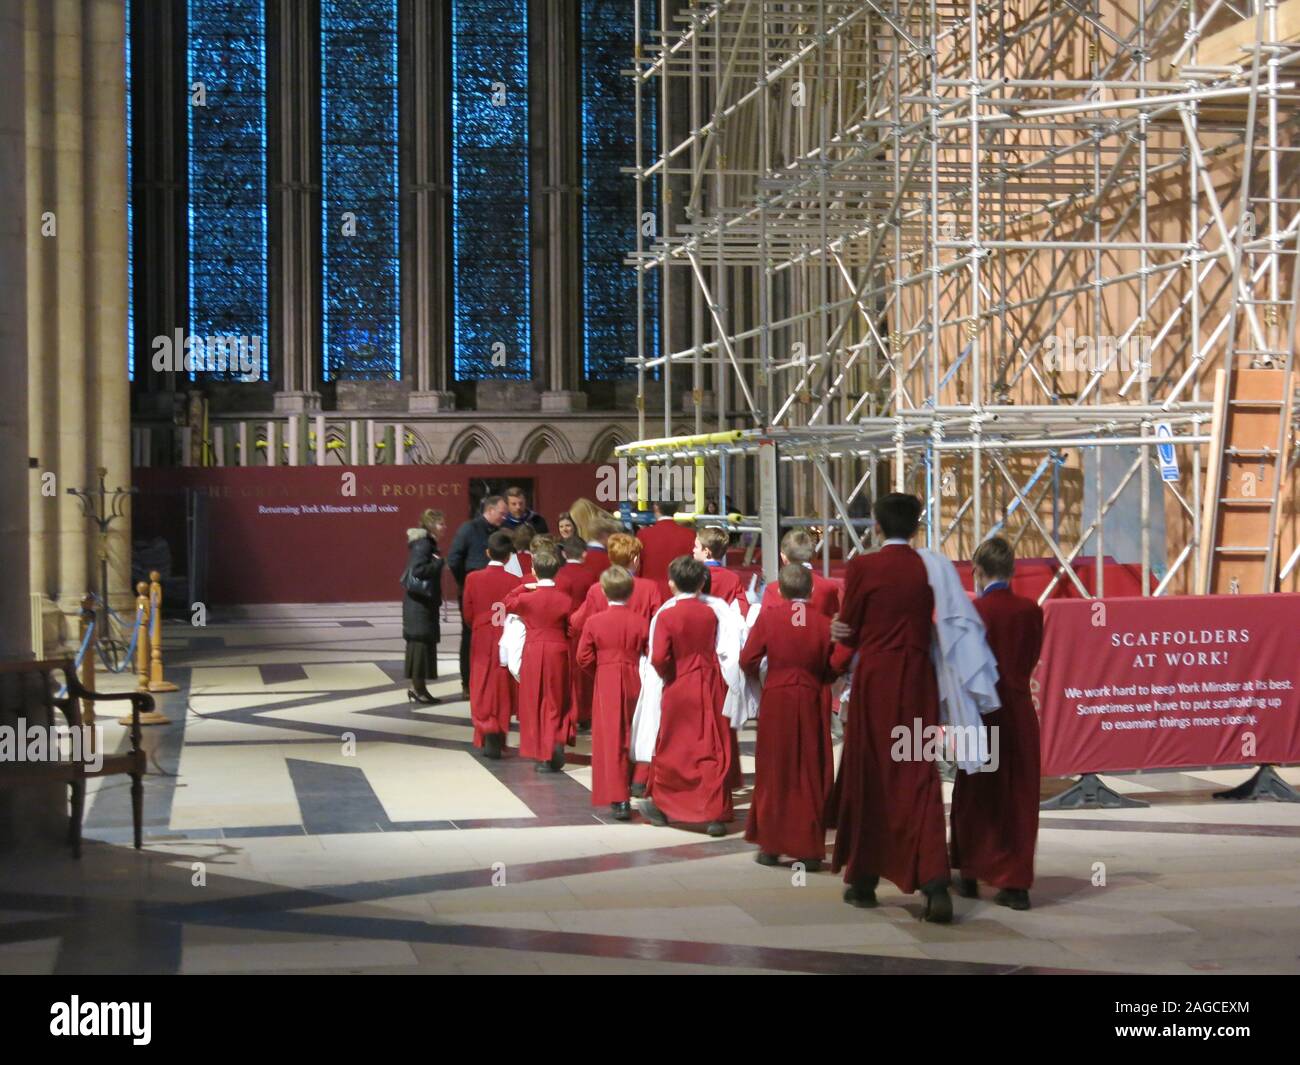 Parade of choirboys inside the Minster on their way to Choral Evensong; York Minster, December 2019 Stock Photo